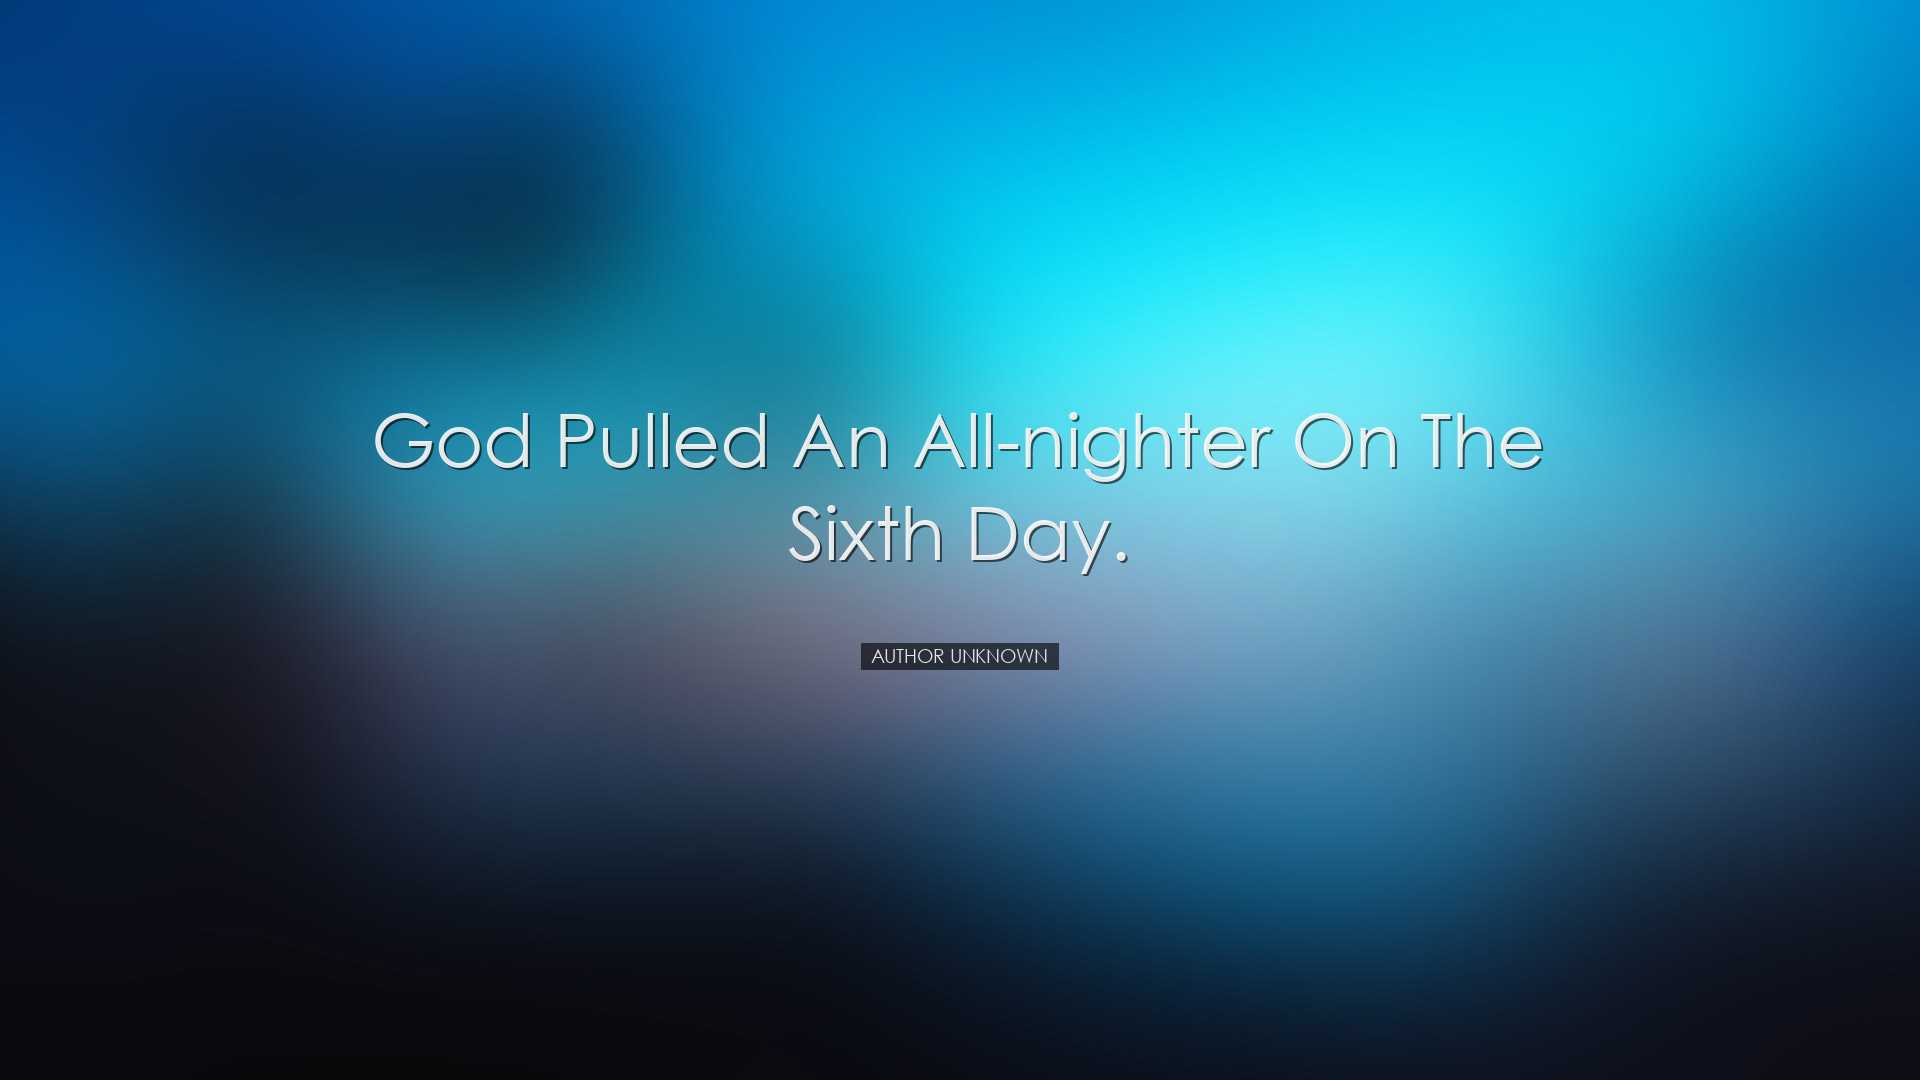 God pulled an all-nighter on the sixth day. - Author Unknown